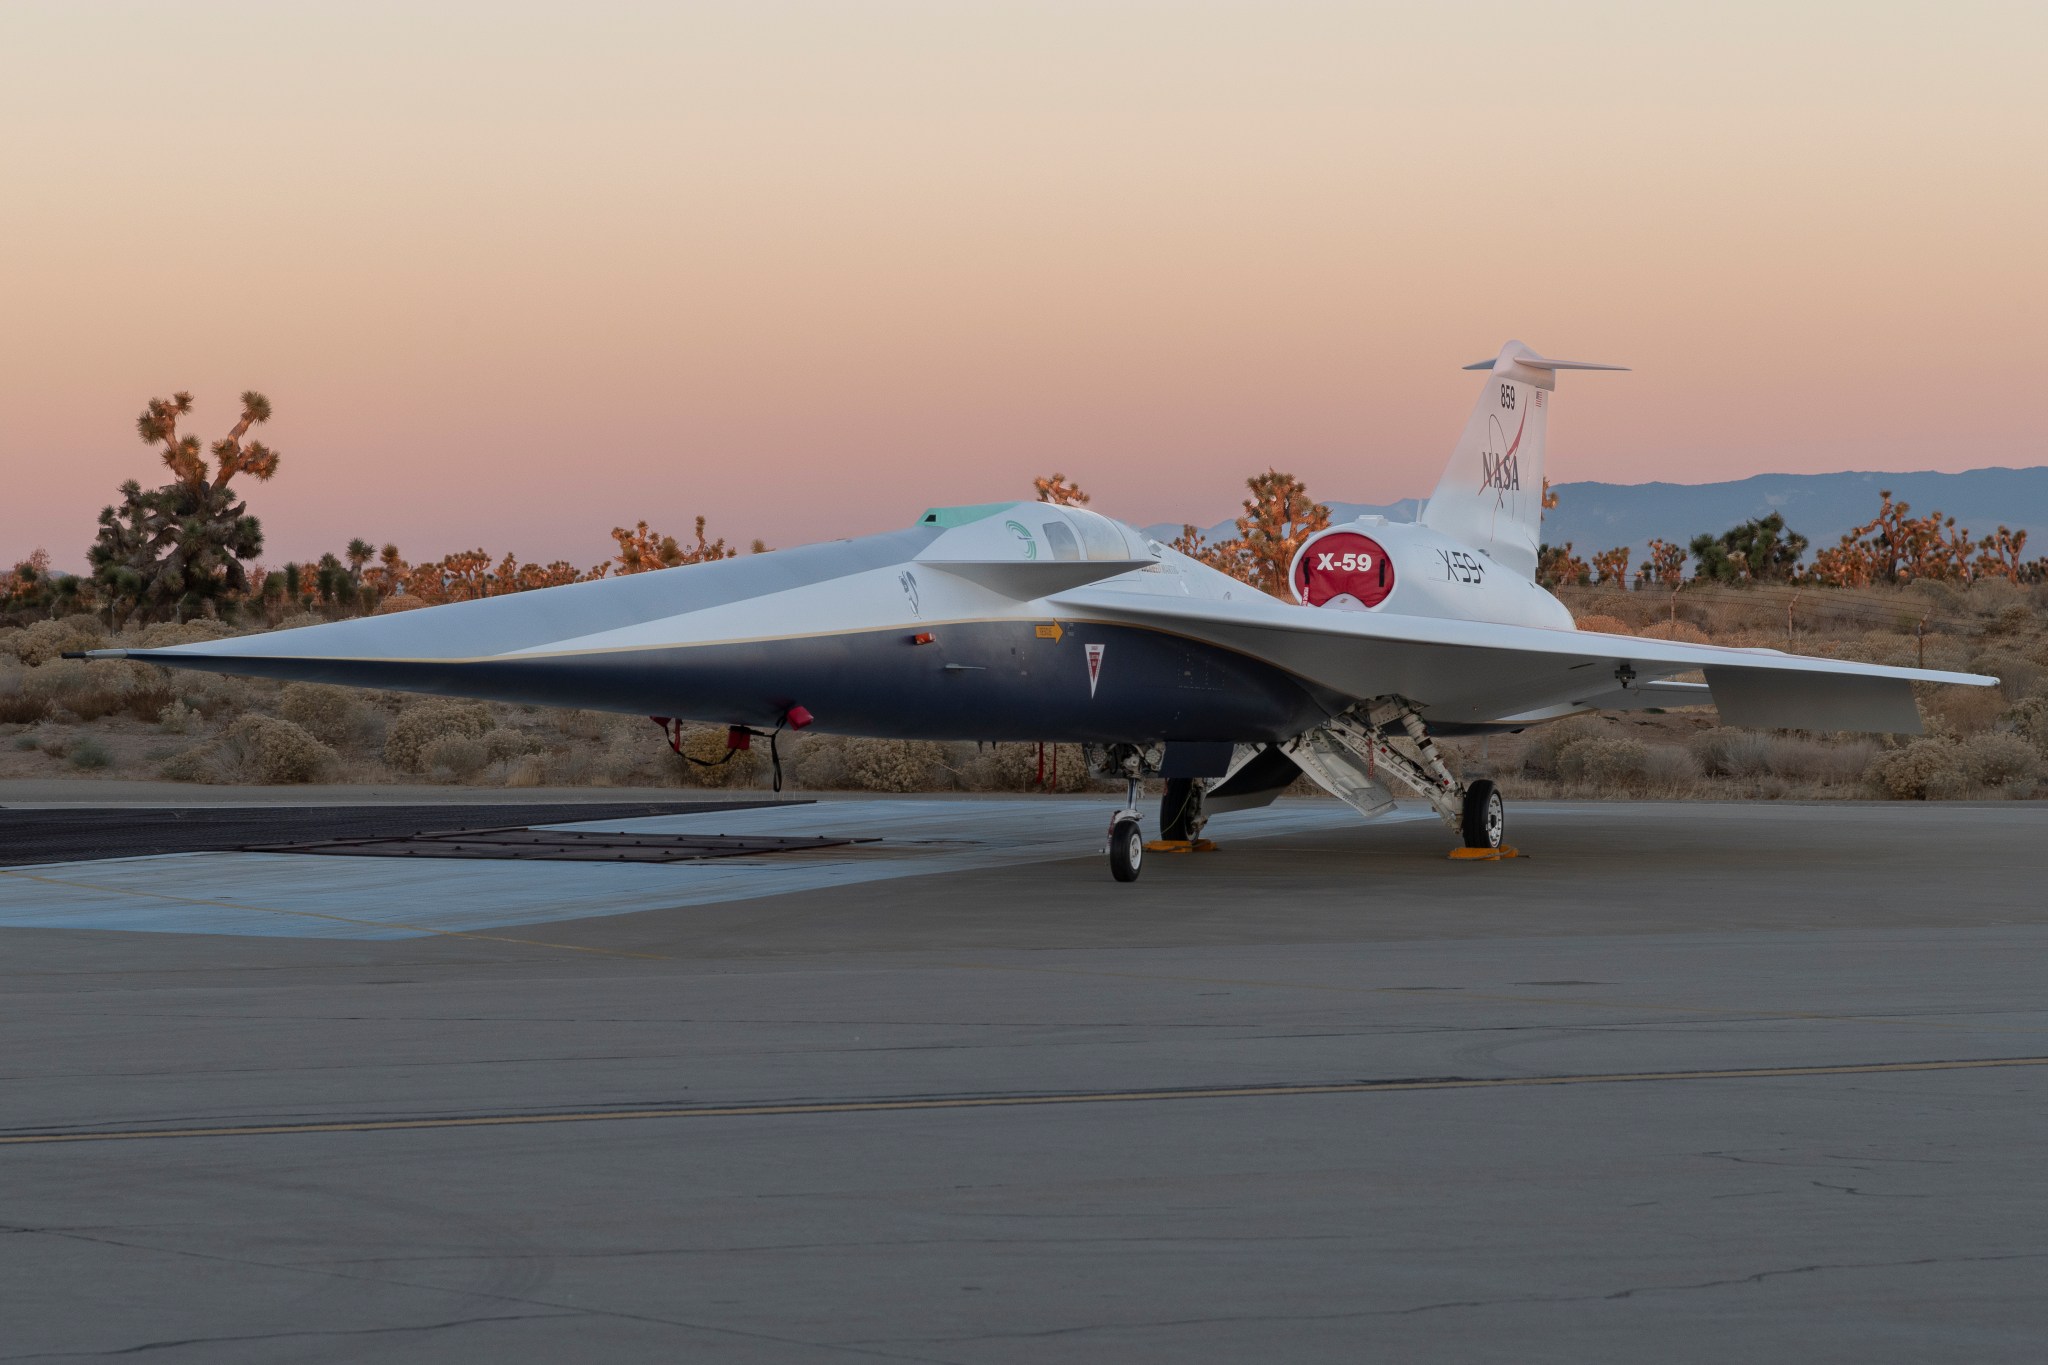 In this photo, NASA’s X-59 aircraft is shown at sunrise at the Lockheed Martin Skunk Works in Palmdale, California. Open desert can be seen behind the aircraft. The X-59’s design features a long nose, approximately one-third of the aircraft’s nearly 100-foot length, swept-back wings, and an engine mounted on top and toward the rear of the fuselage.